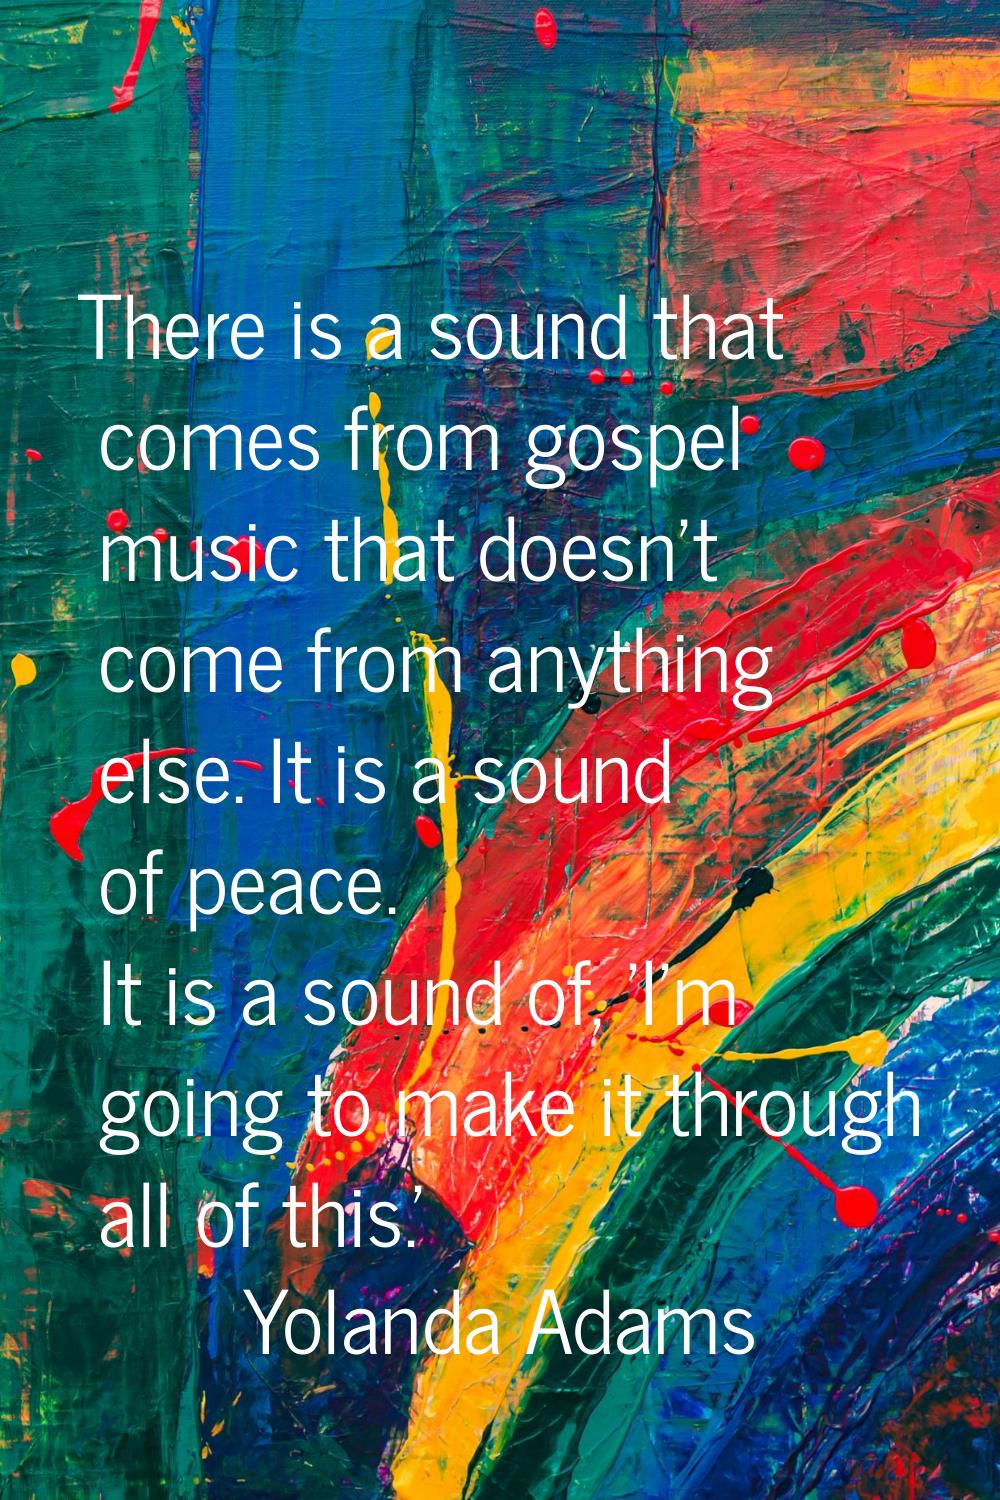 There is a sound that comes from gospel music that doesn't come from anything else. It is a sound o